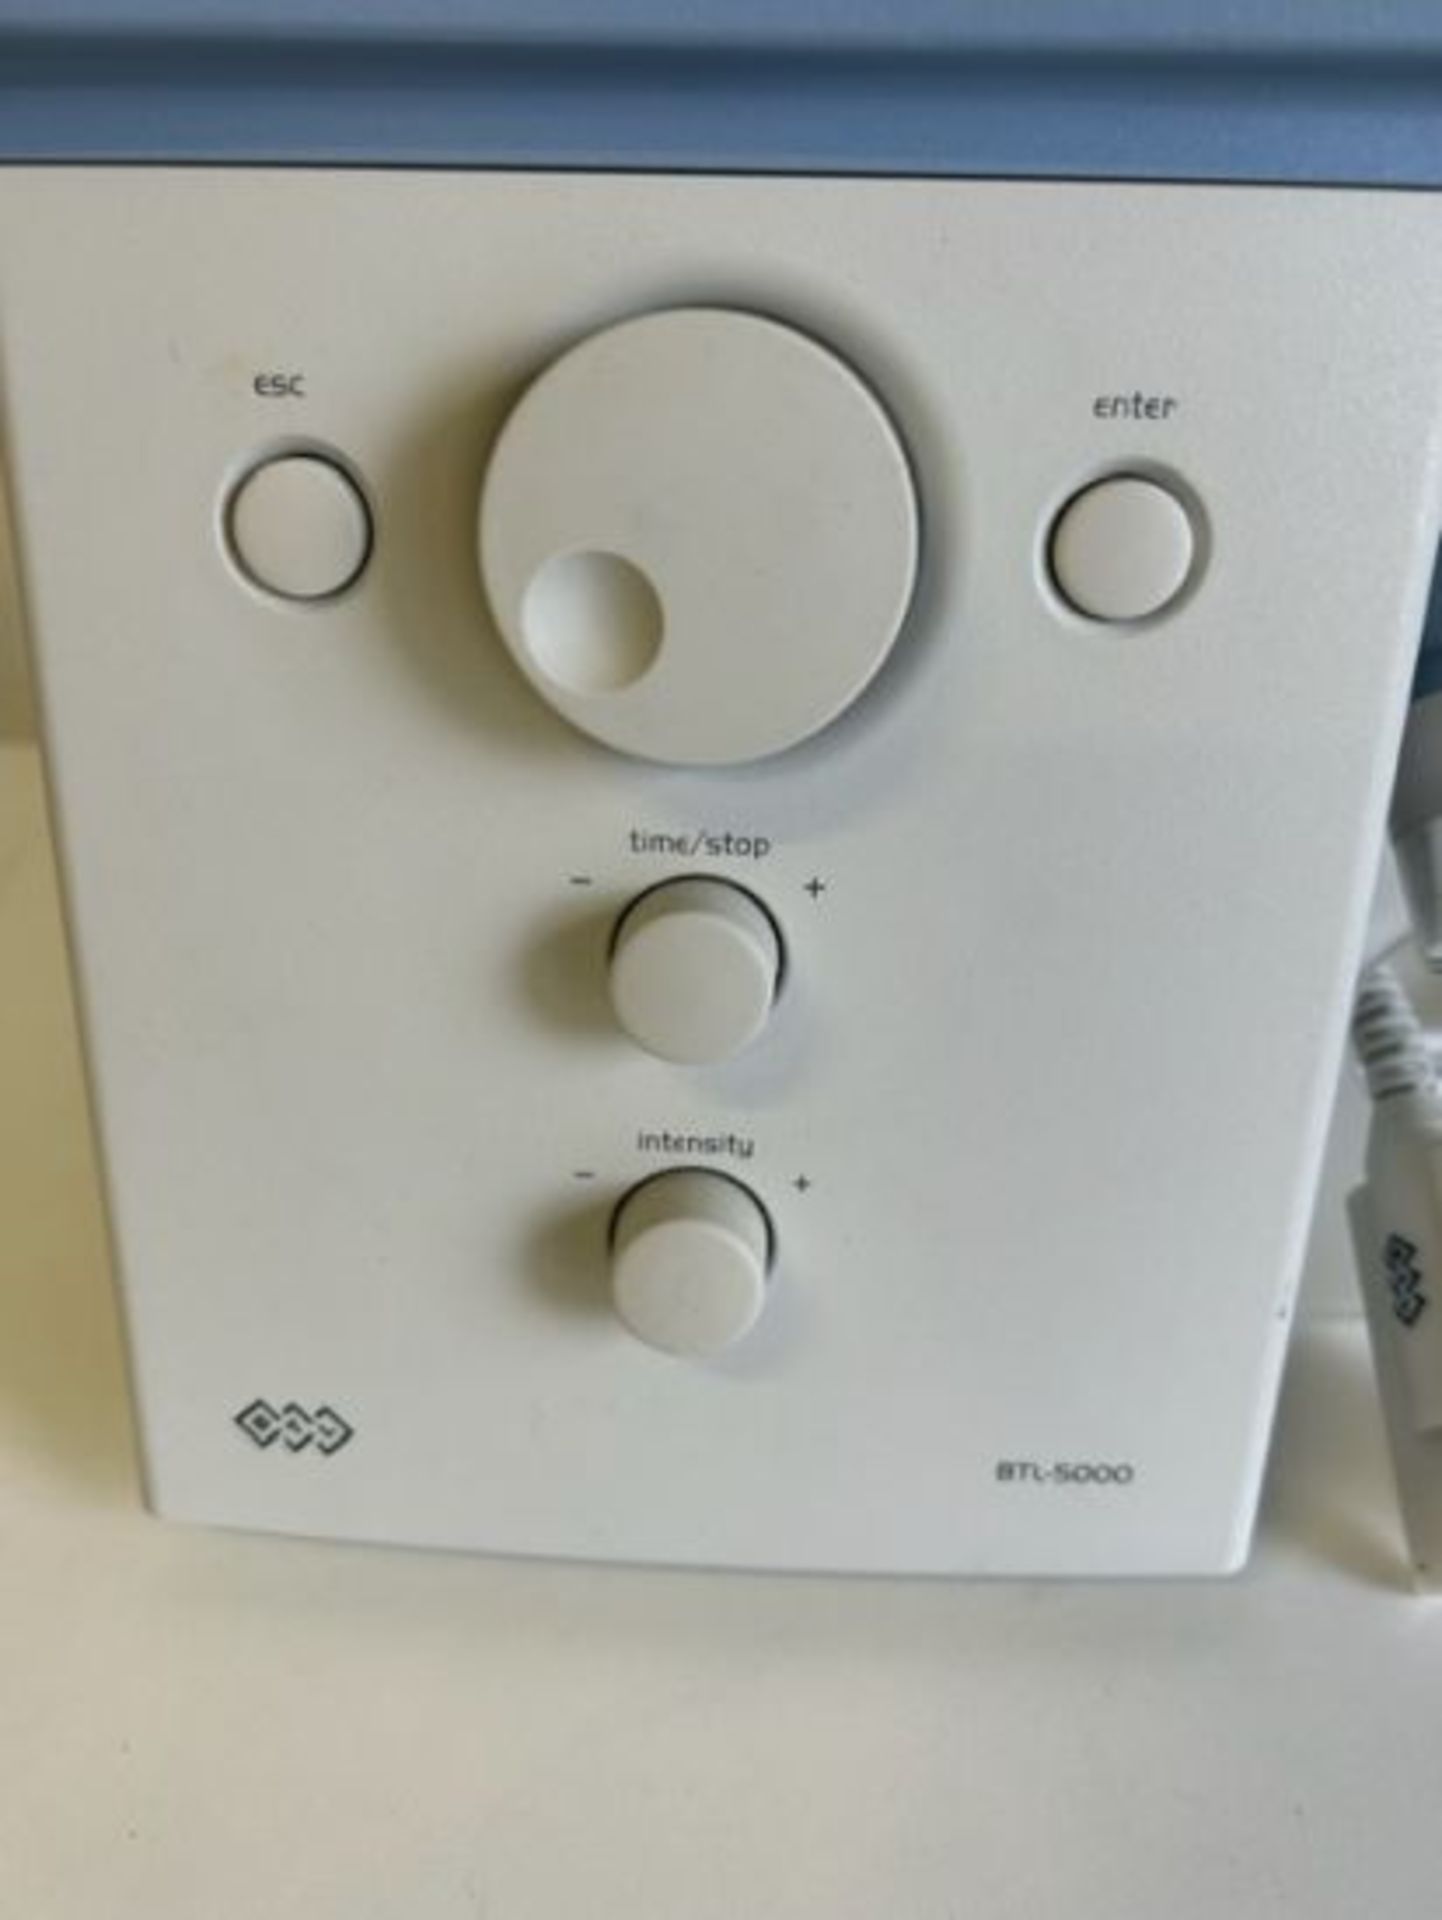 BTL-5820S Two channel device of an Electrotherapy and Ultrasound. - Image 2 of 3